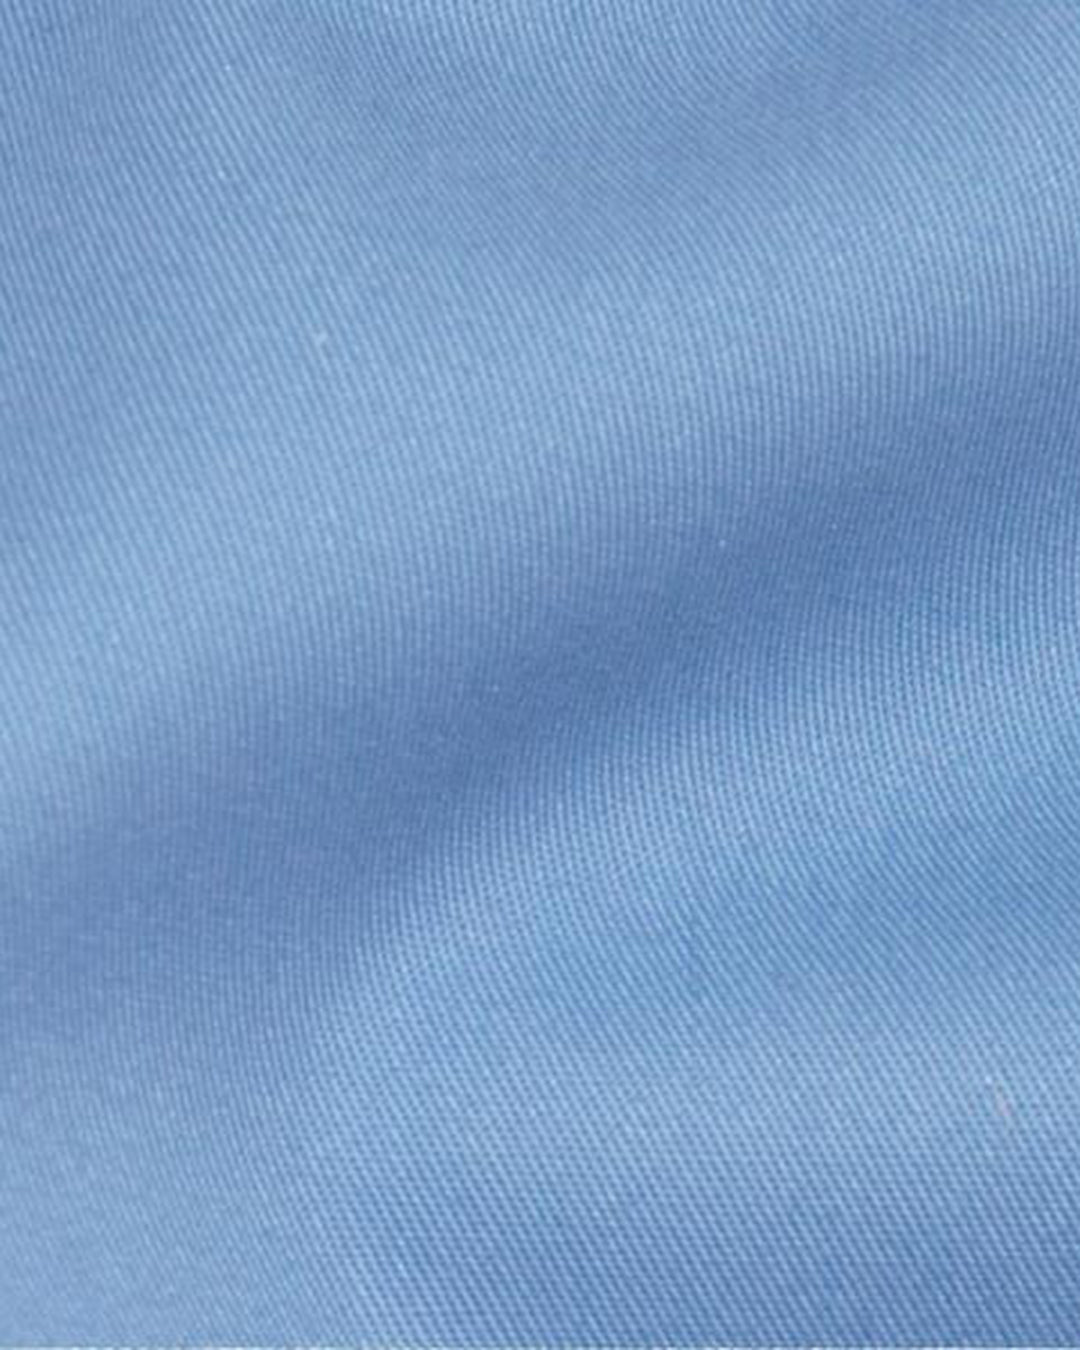 Blue Business Shirt: Soft, Weighty and Wrinkle Free